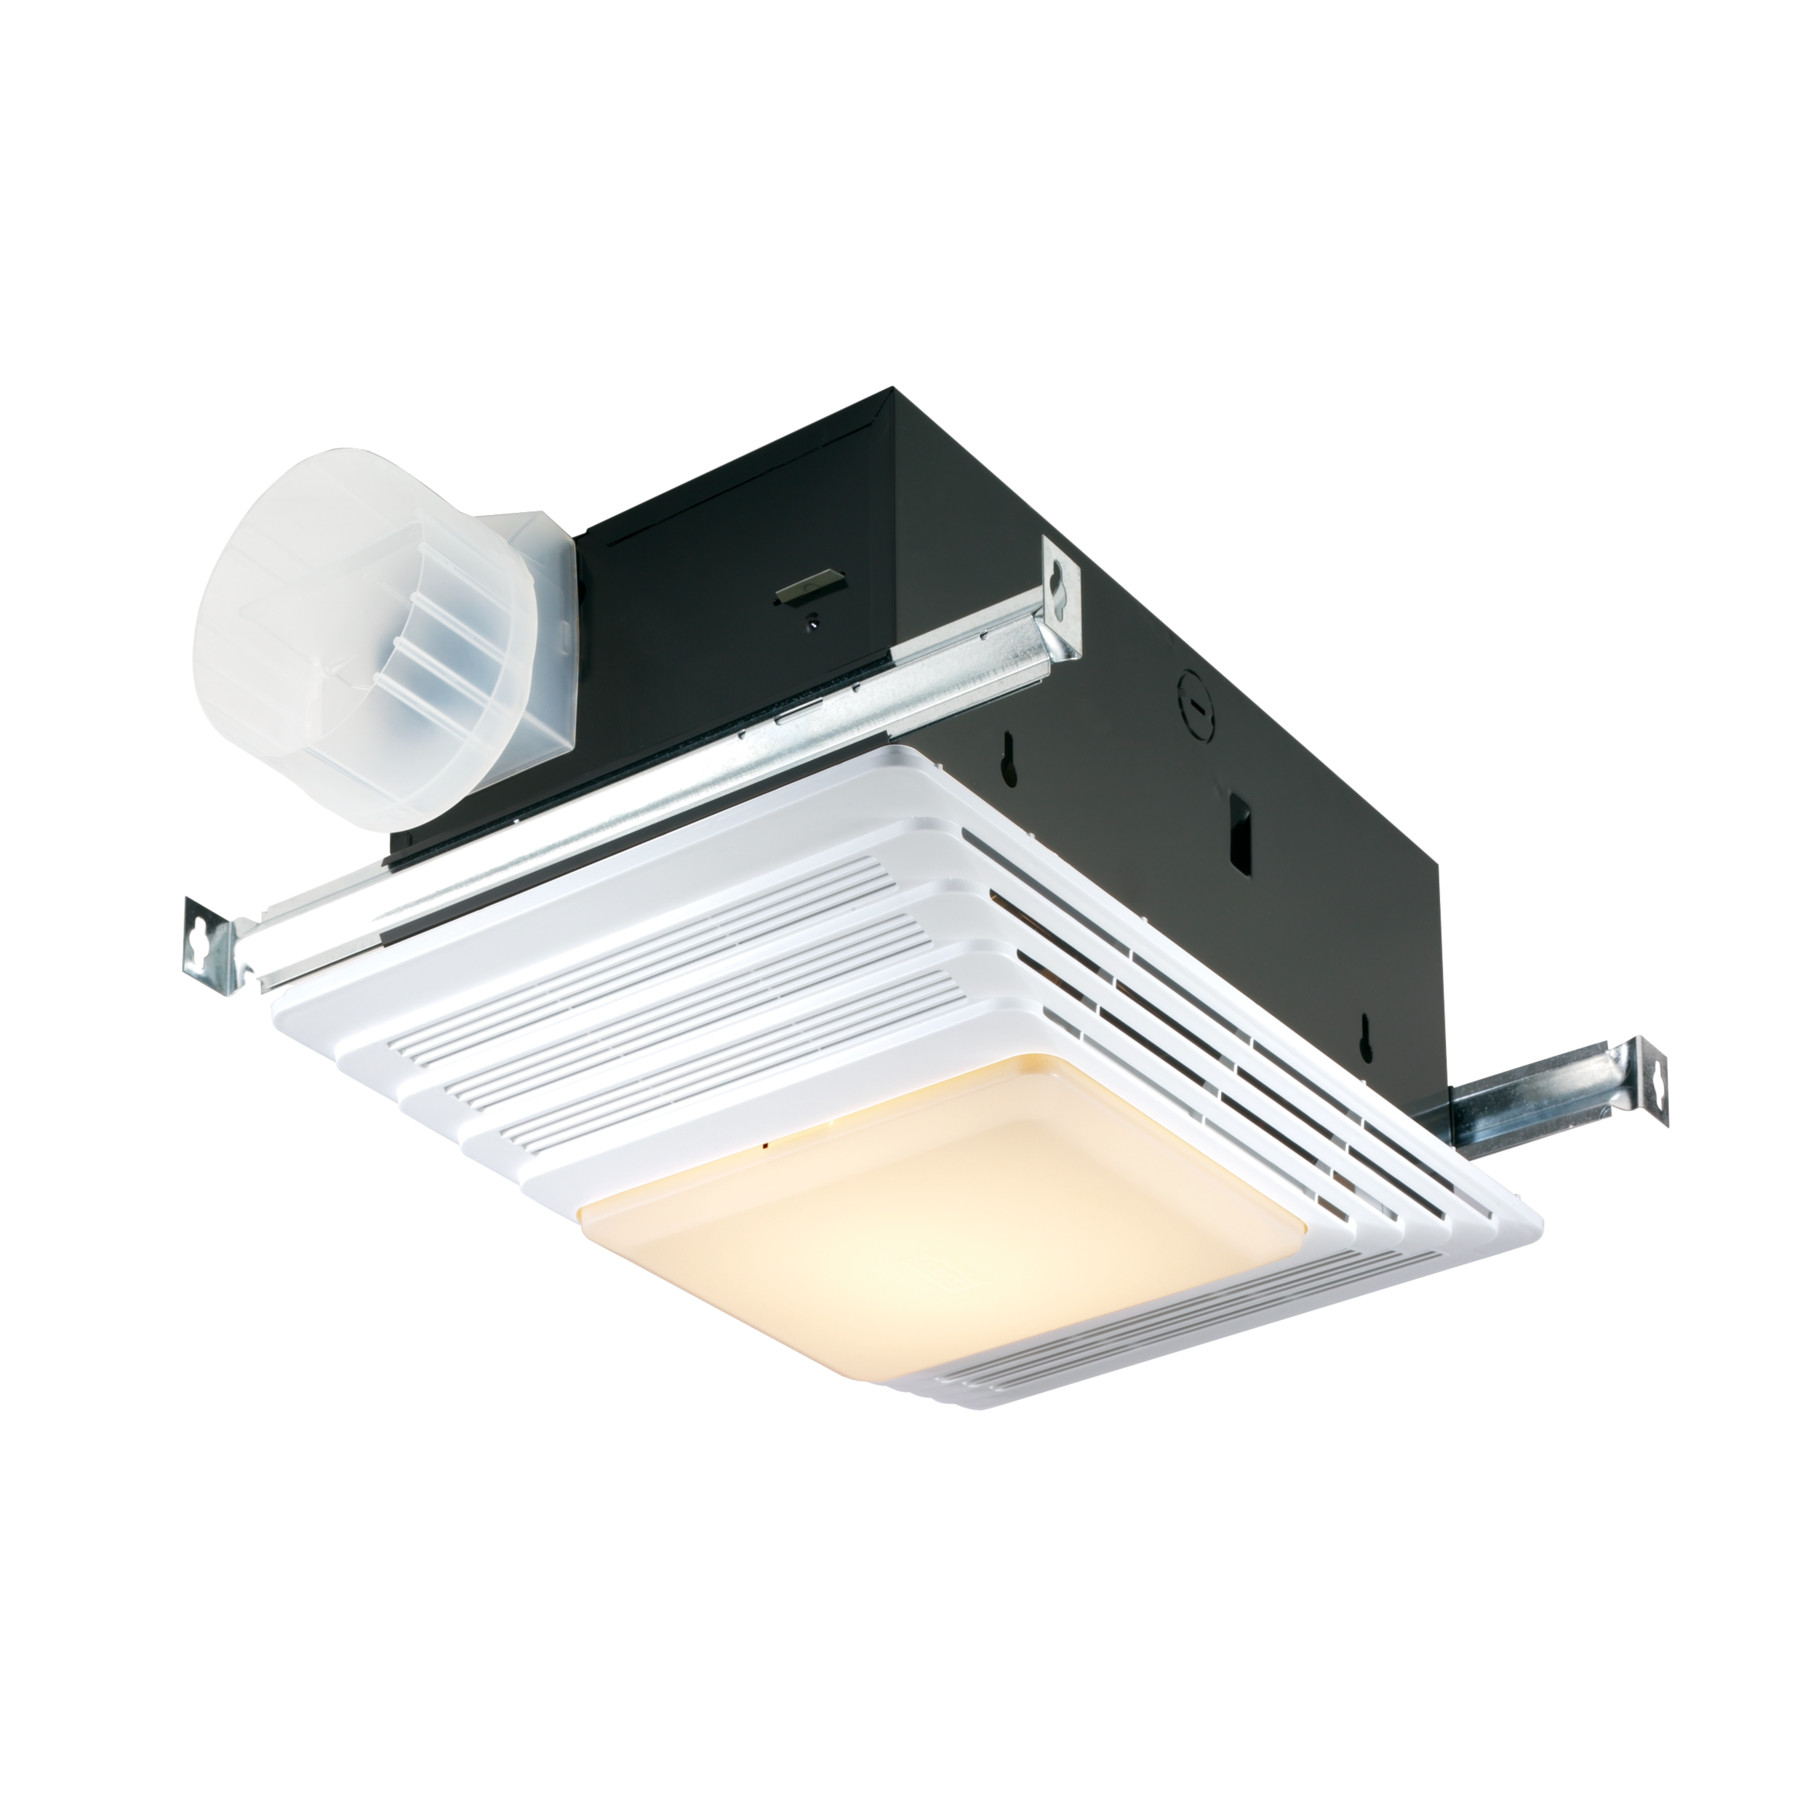 **DISCONTINUED** Broan® 50 CFM Ceiling Bathroom Exhaust Fan with Light and Heater